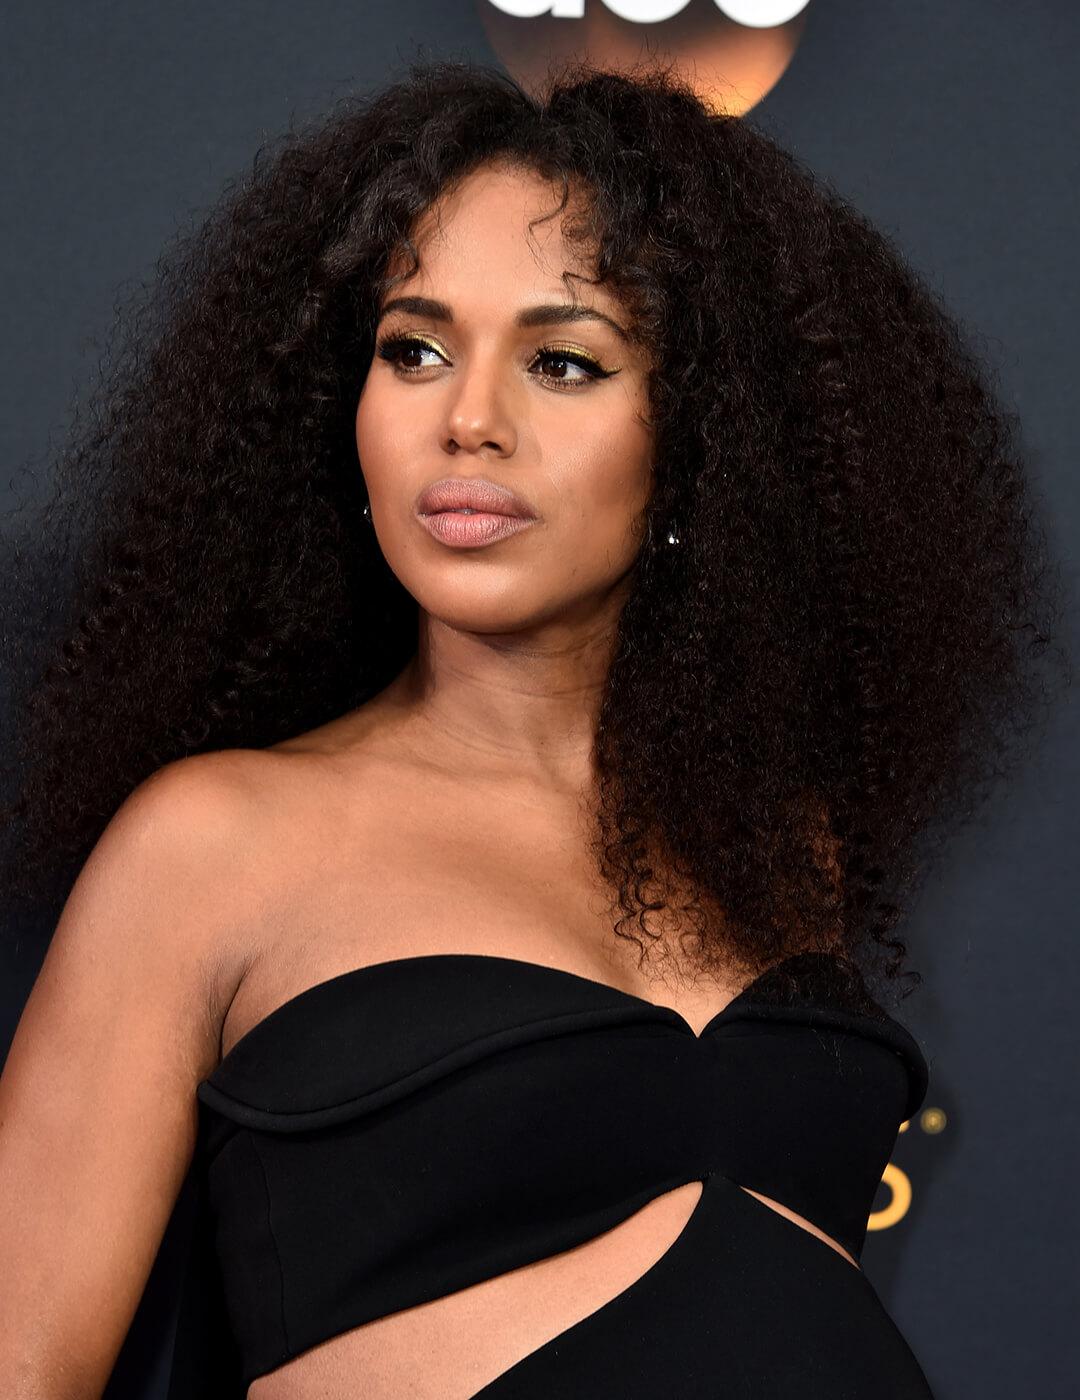 A photo of Kerry Washington with flowing curls wearing a black dress